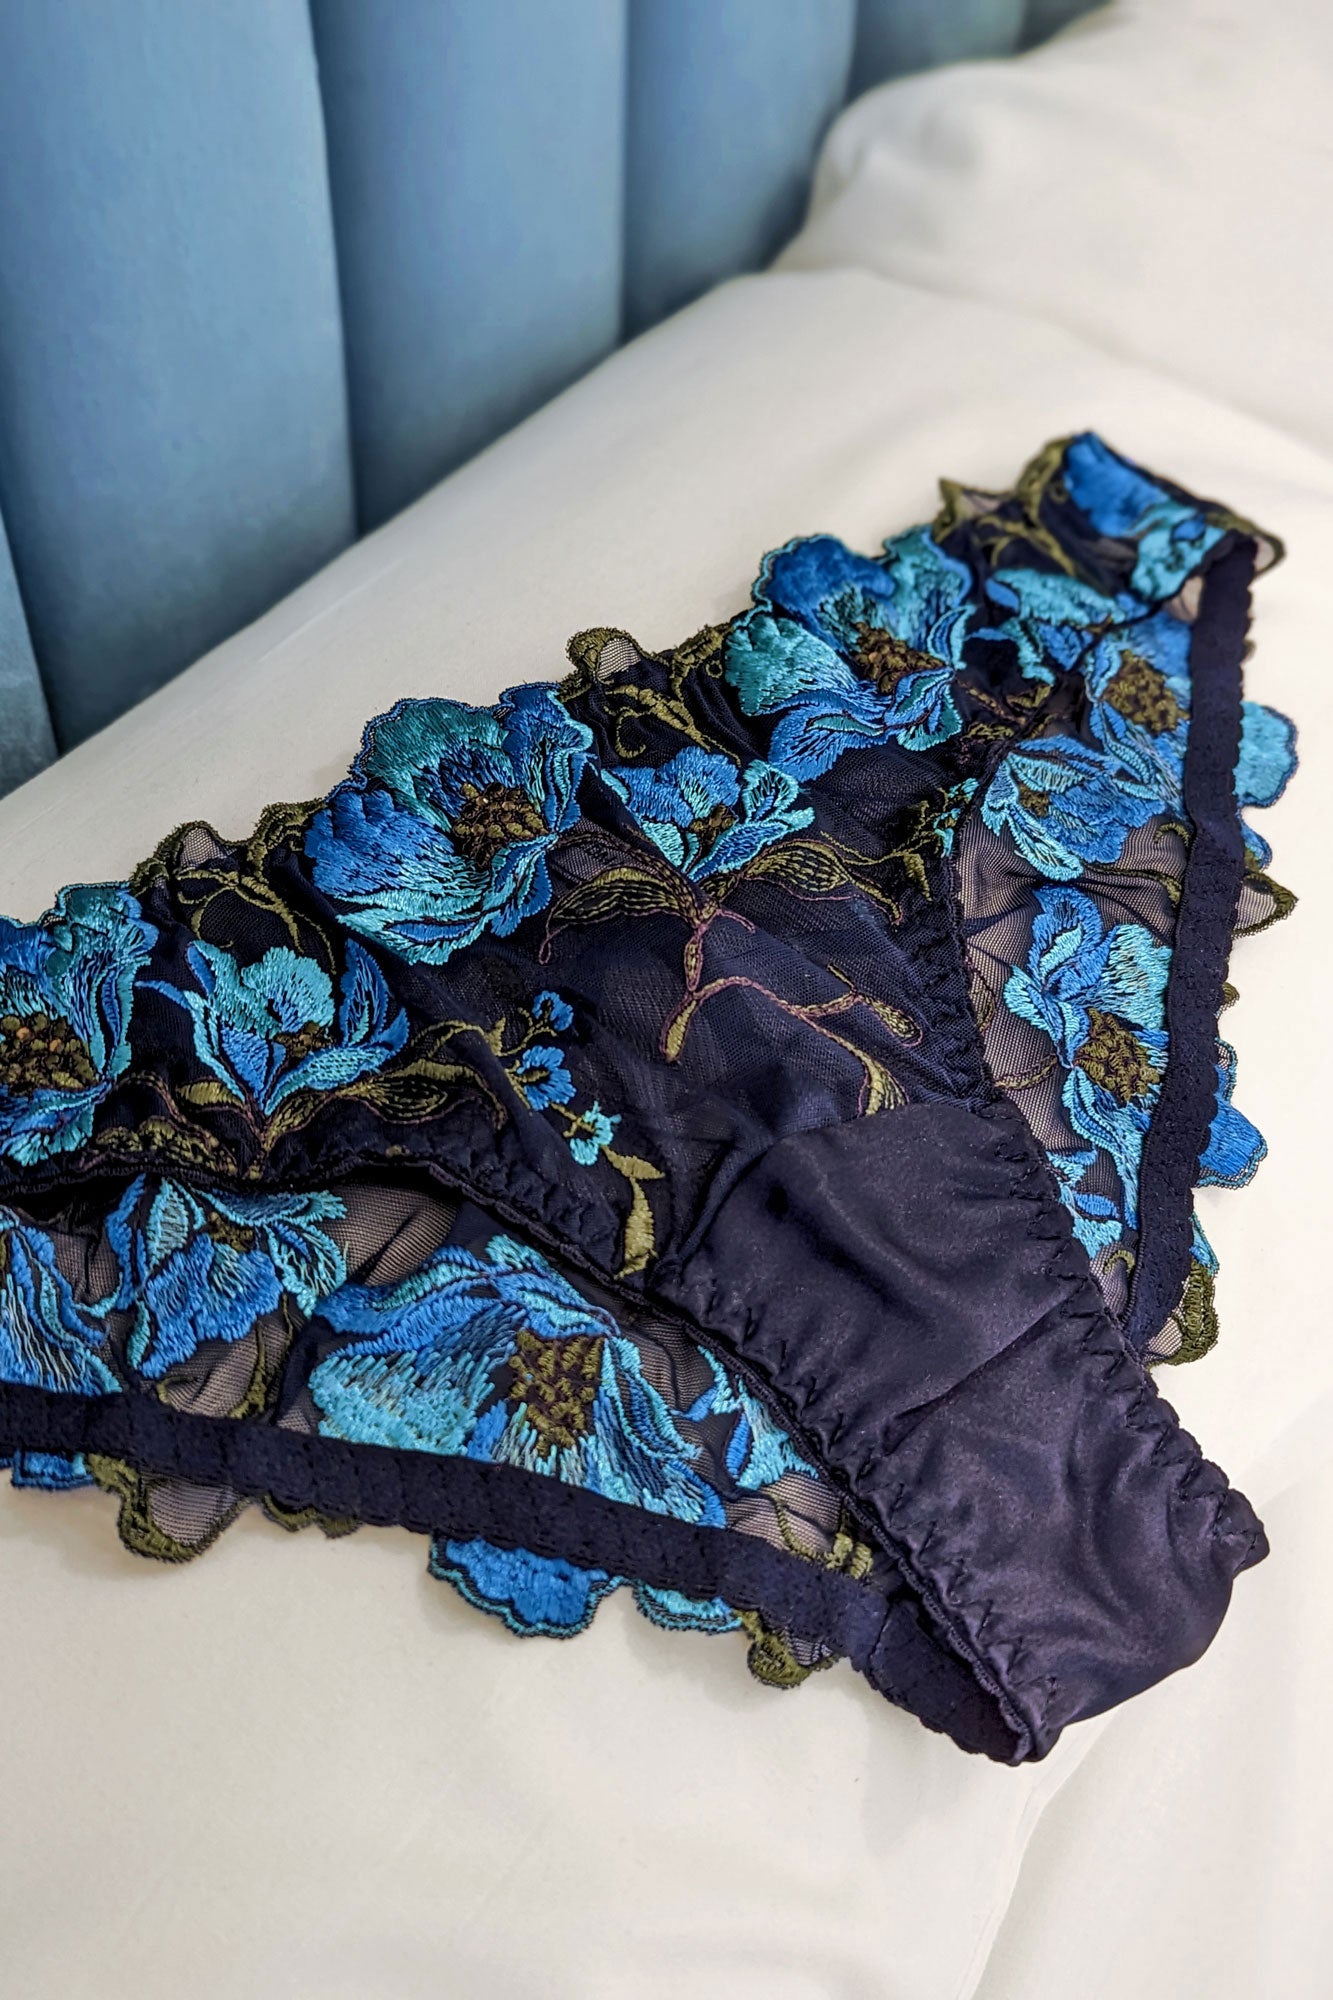 Odile embroidered knickers  Luxury, pure silk underwear